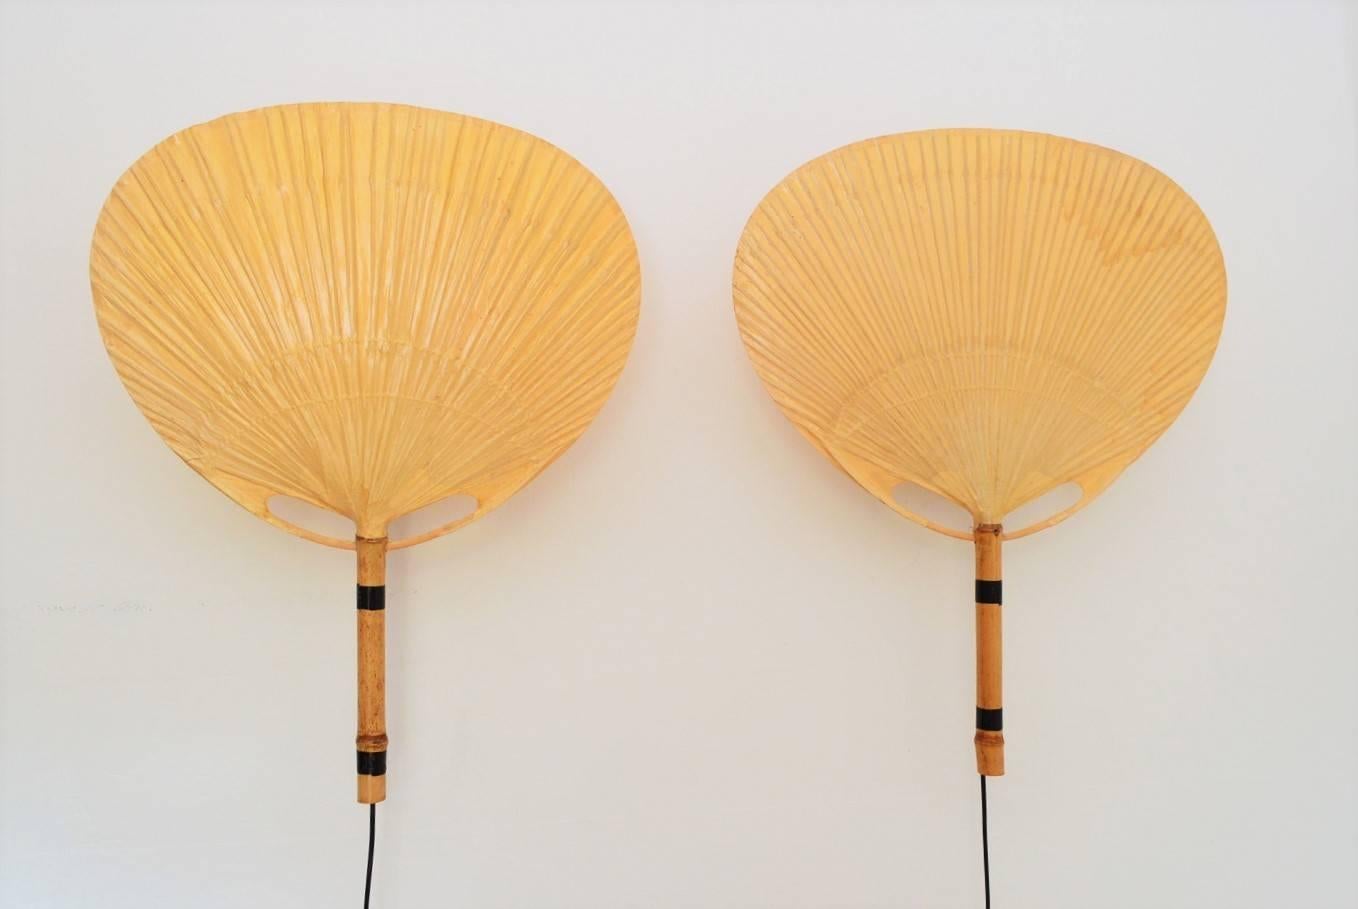 Three different wall sconces Ingo Maurer, Germany, 1973
made of bamboo and rice paper.
The set is composed as follows:
2 pcs. Uchiwa fans, 30.71 in.Hx23.23 in.Wx7.09 in.D
1 pc. Uchiwa fan, 23.62 in.Hx18.11 in.Wx7.87 in.D
All pieces in excellent